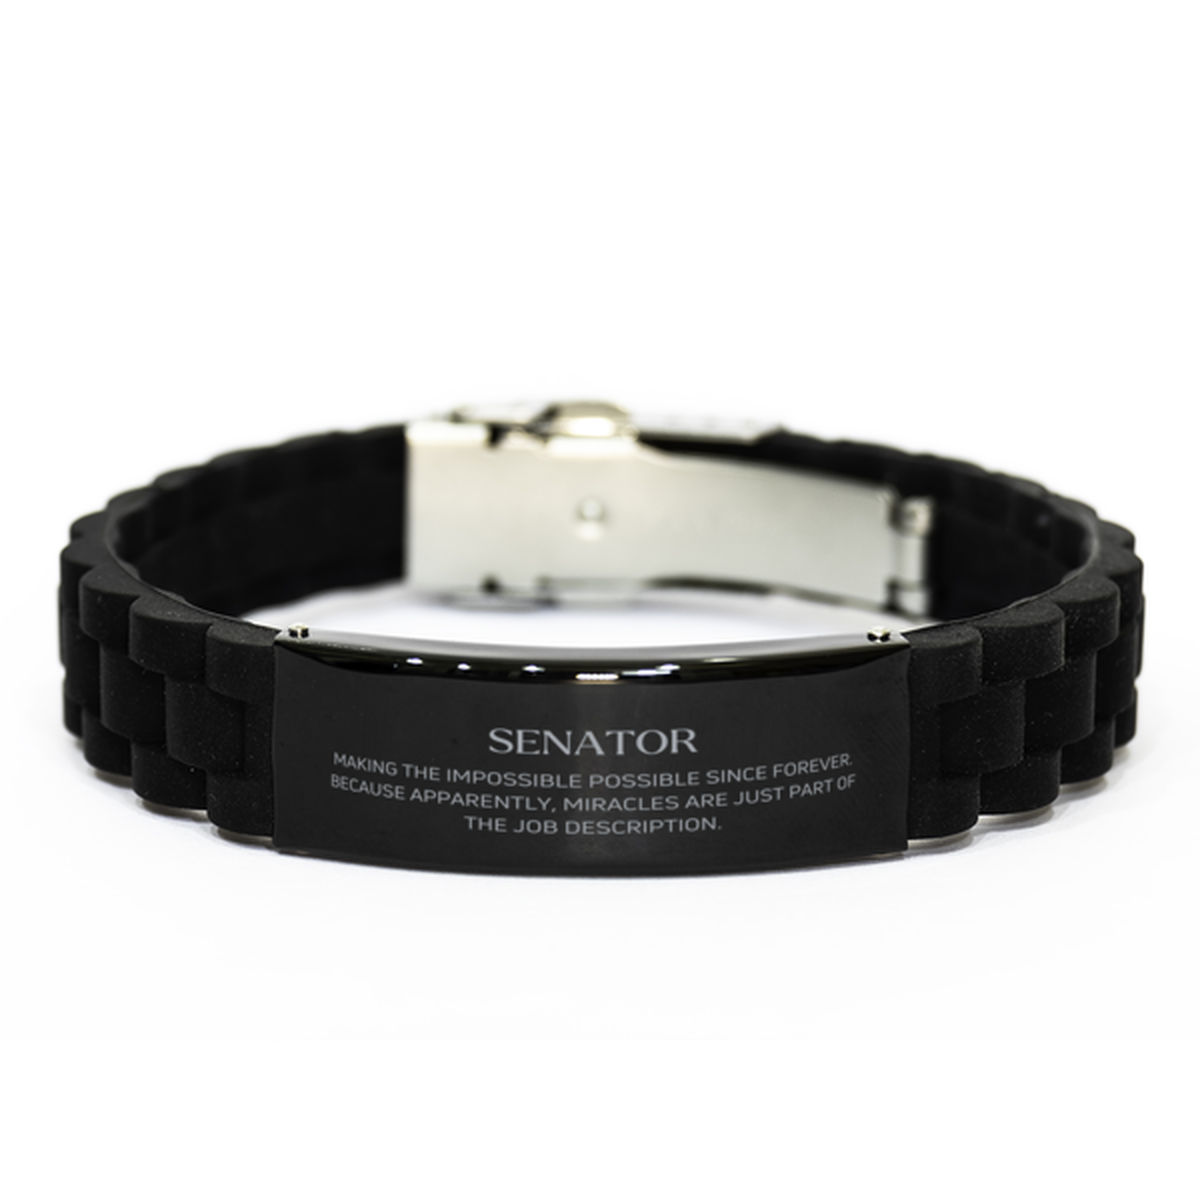 Funny Senator Gifts, Miracles are just part of the job description, Inspirational Birthday Black Glidelock Clasp Bracelet For Senator, Men, Women, Coworkers, Friends, Boss